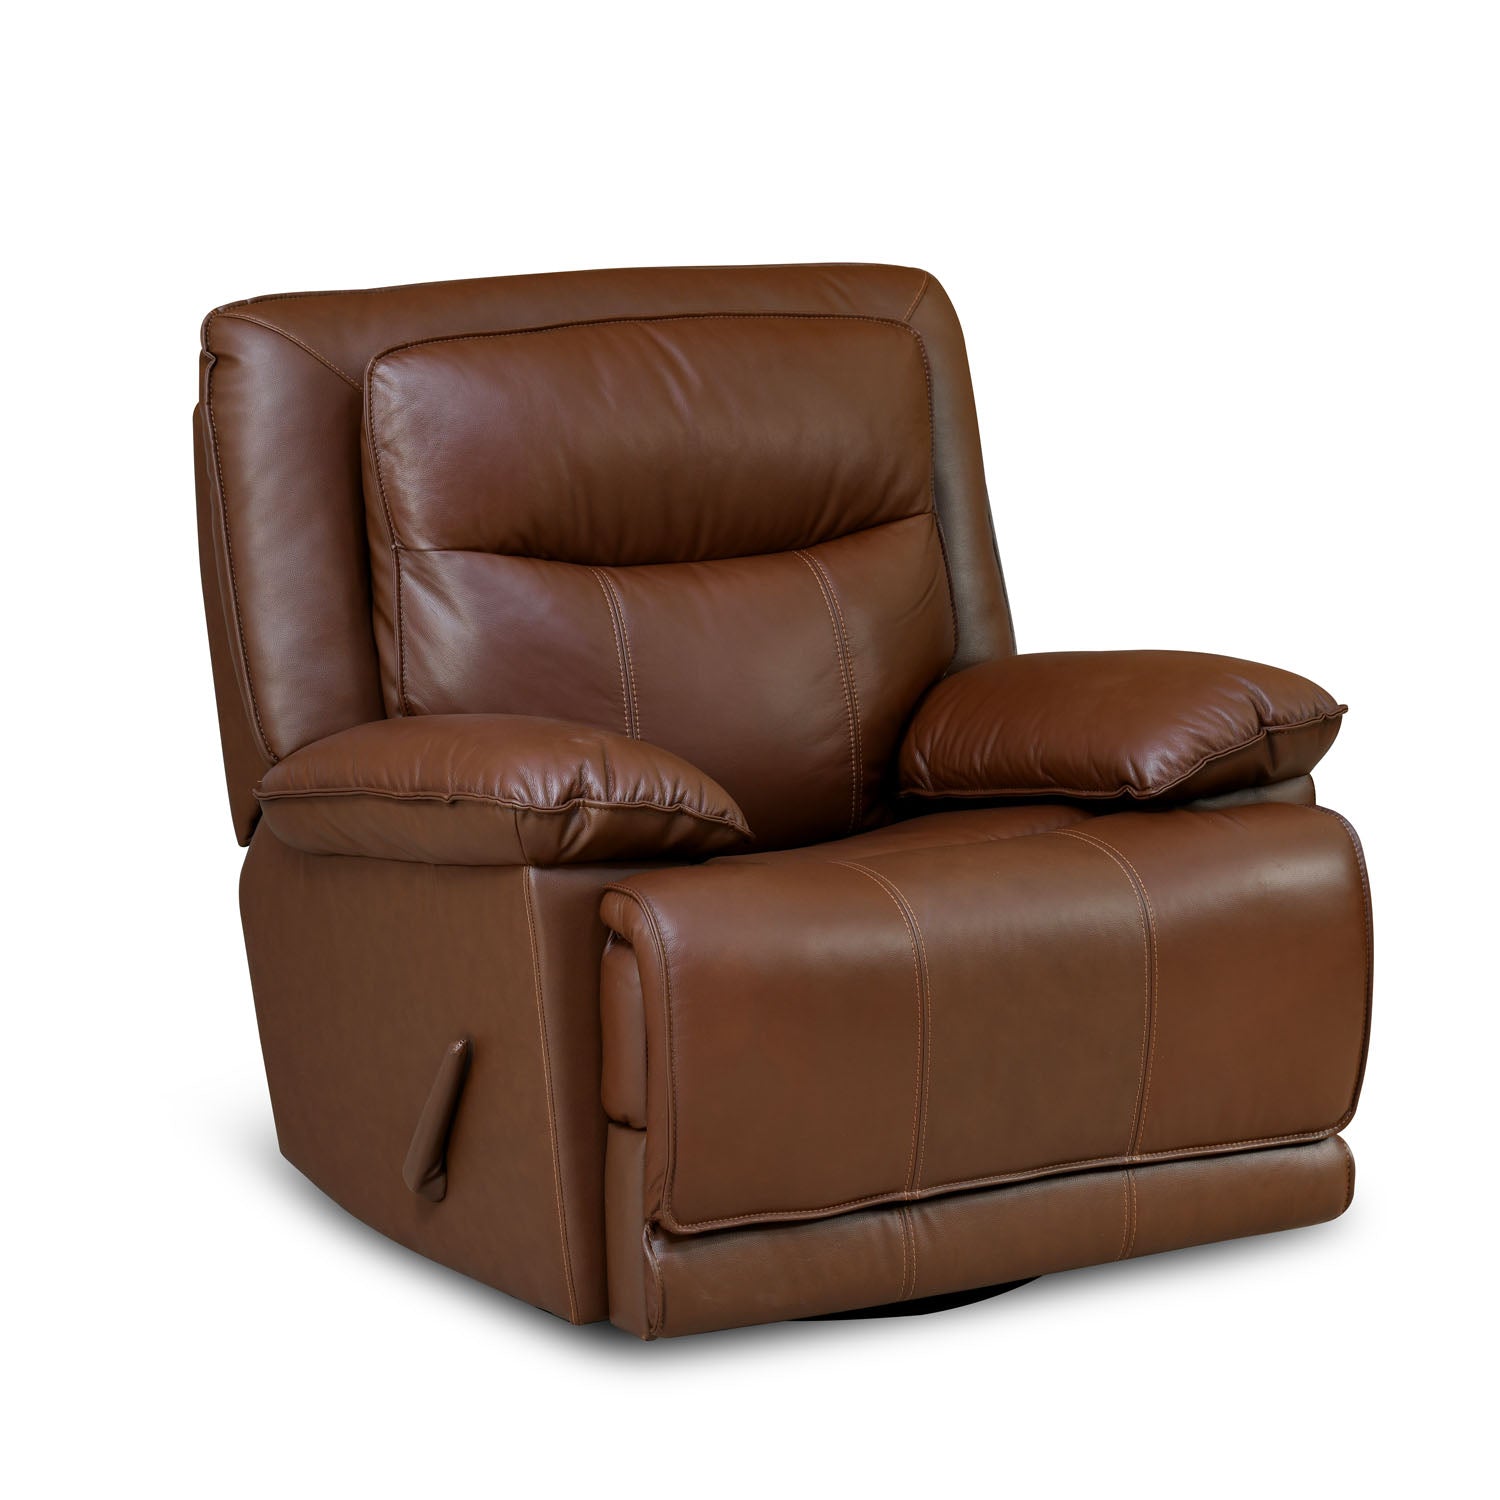 Hayes 1 Seater Leather Manual Recliner with Swivel (Brown)